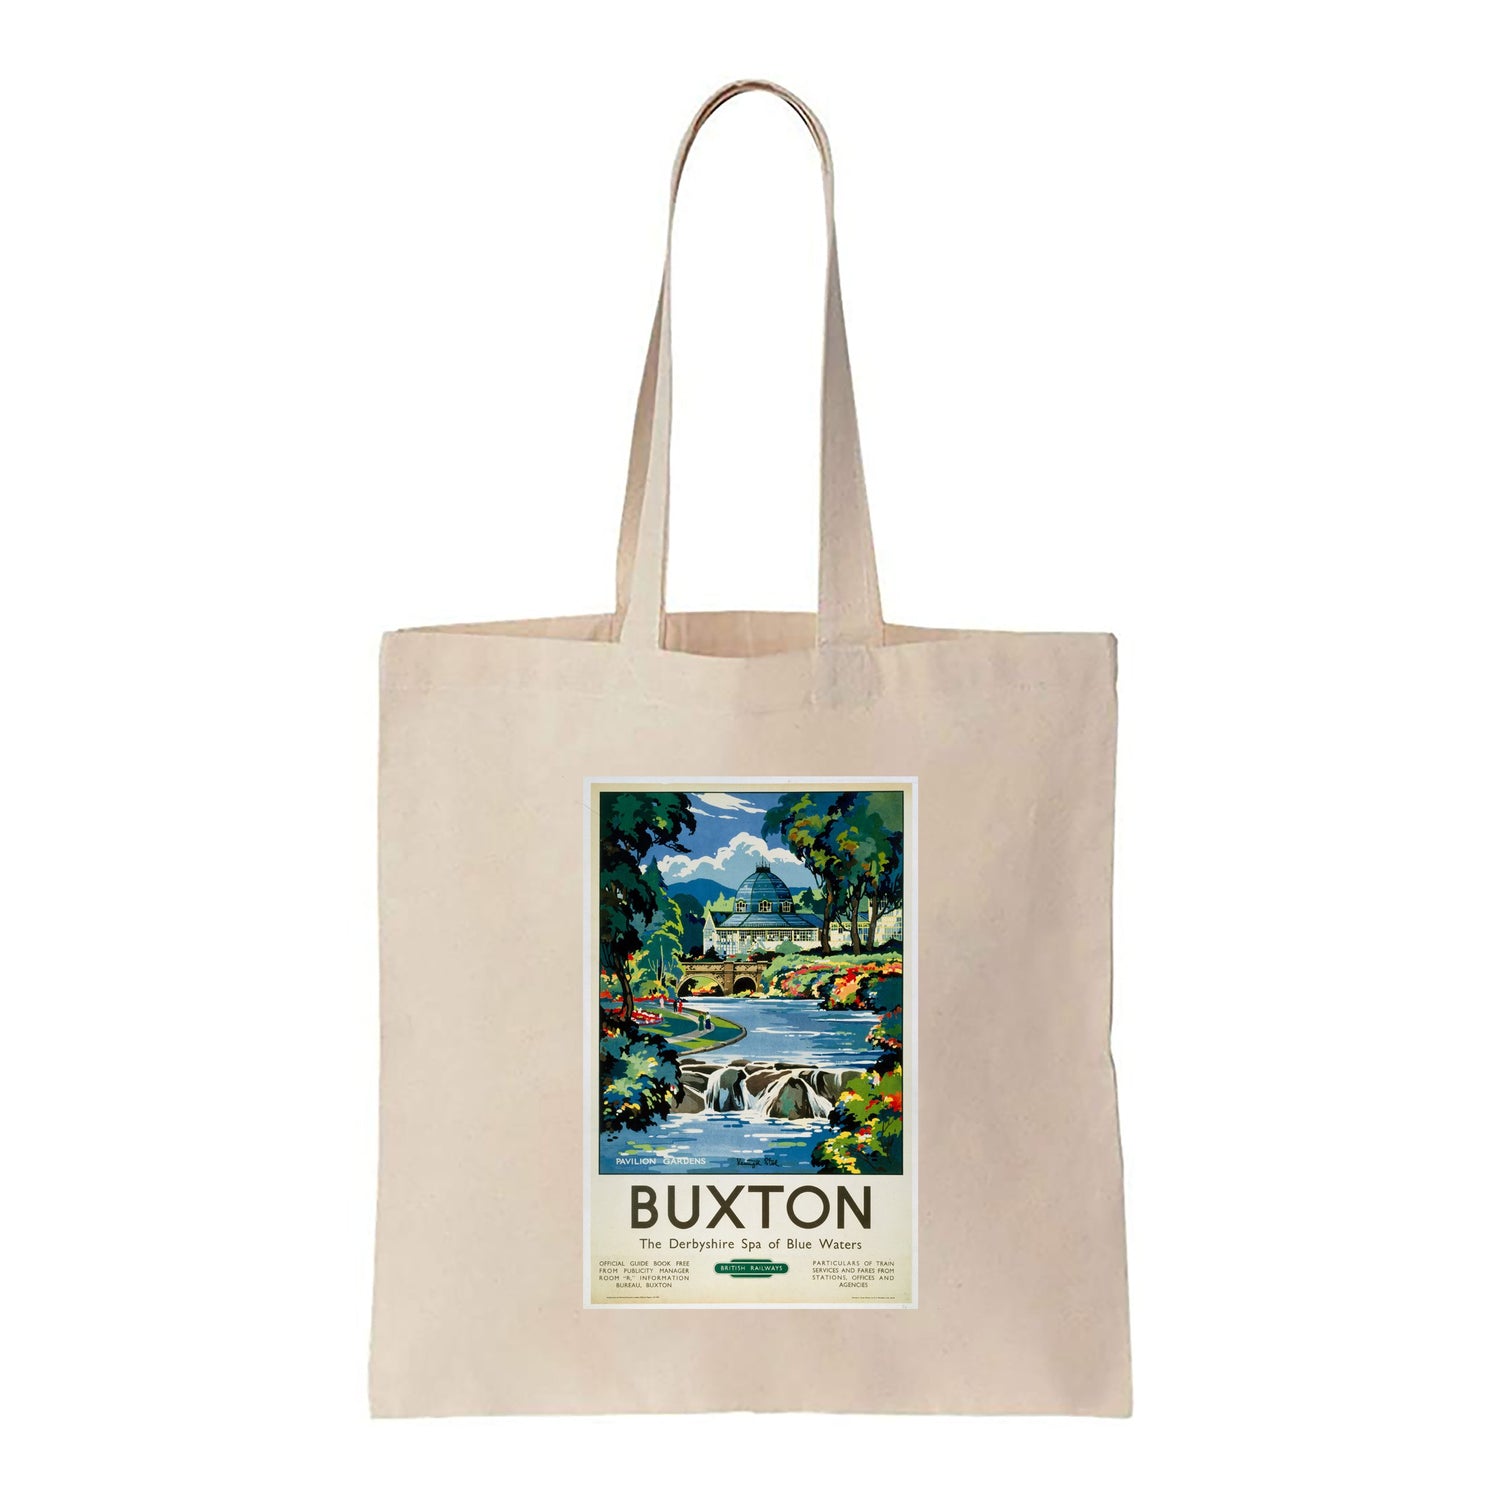 Buxton - The derbyshire spa of Blue waters - Canvas Tote Bag